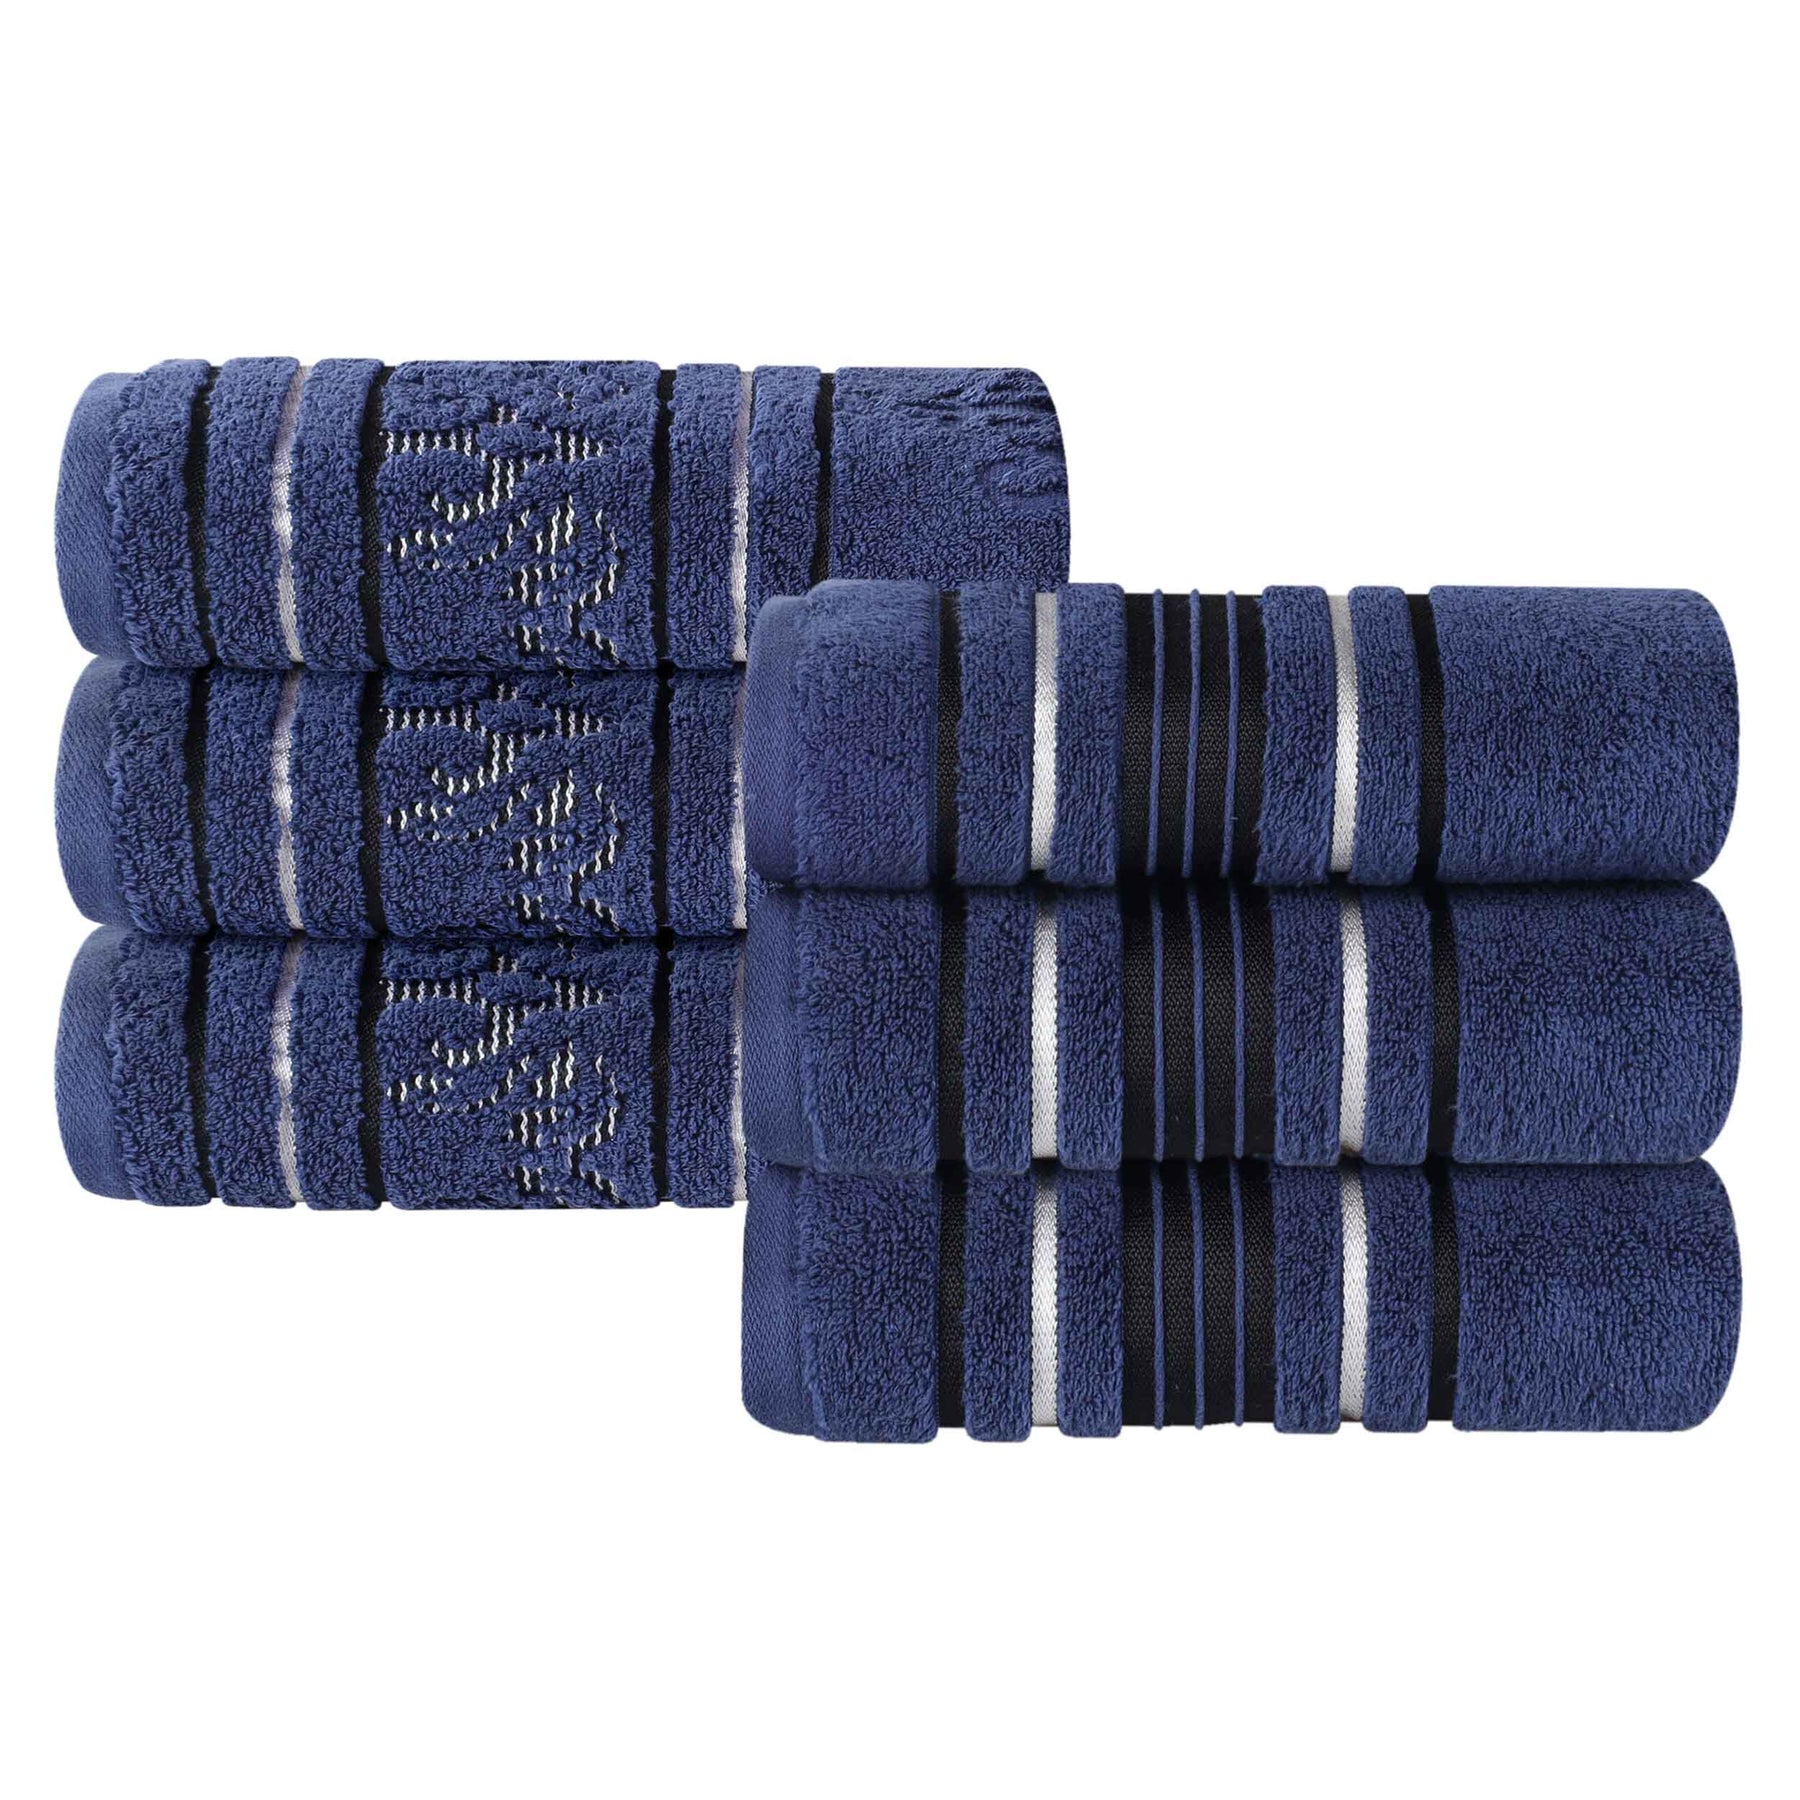 Sadie Zero Twist Cotton Floral Solid and Jacquard Hand Towel - Navy Blue